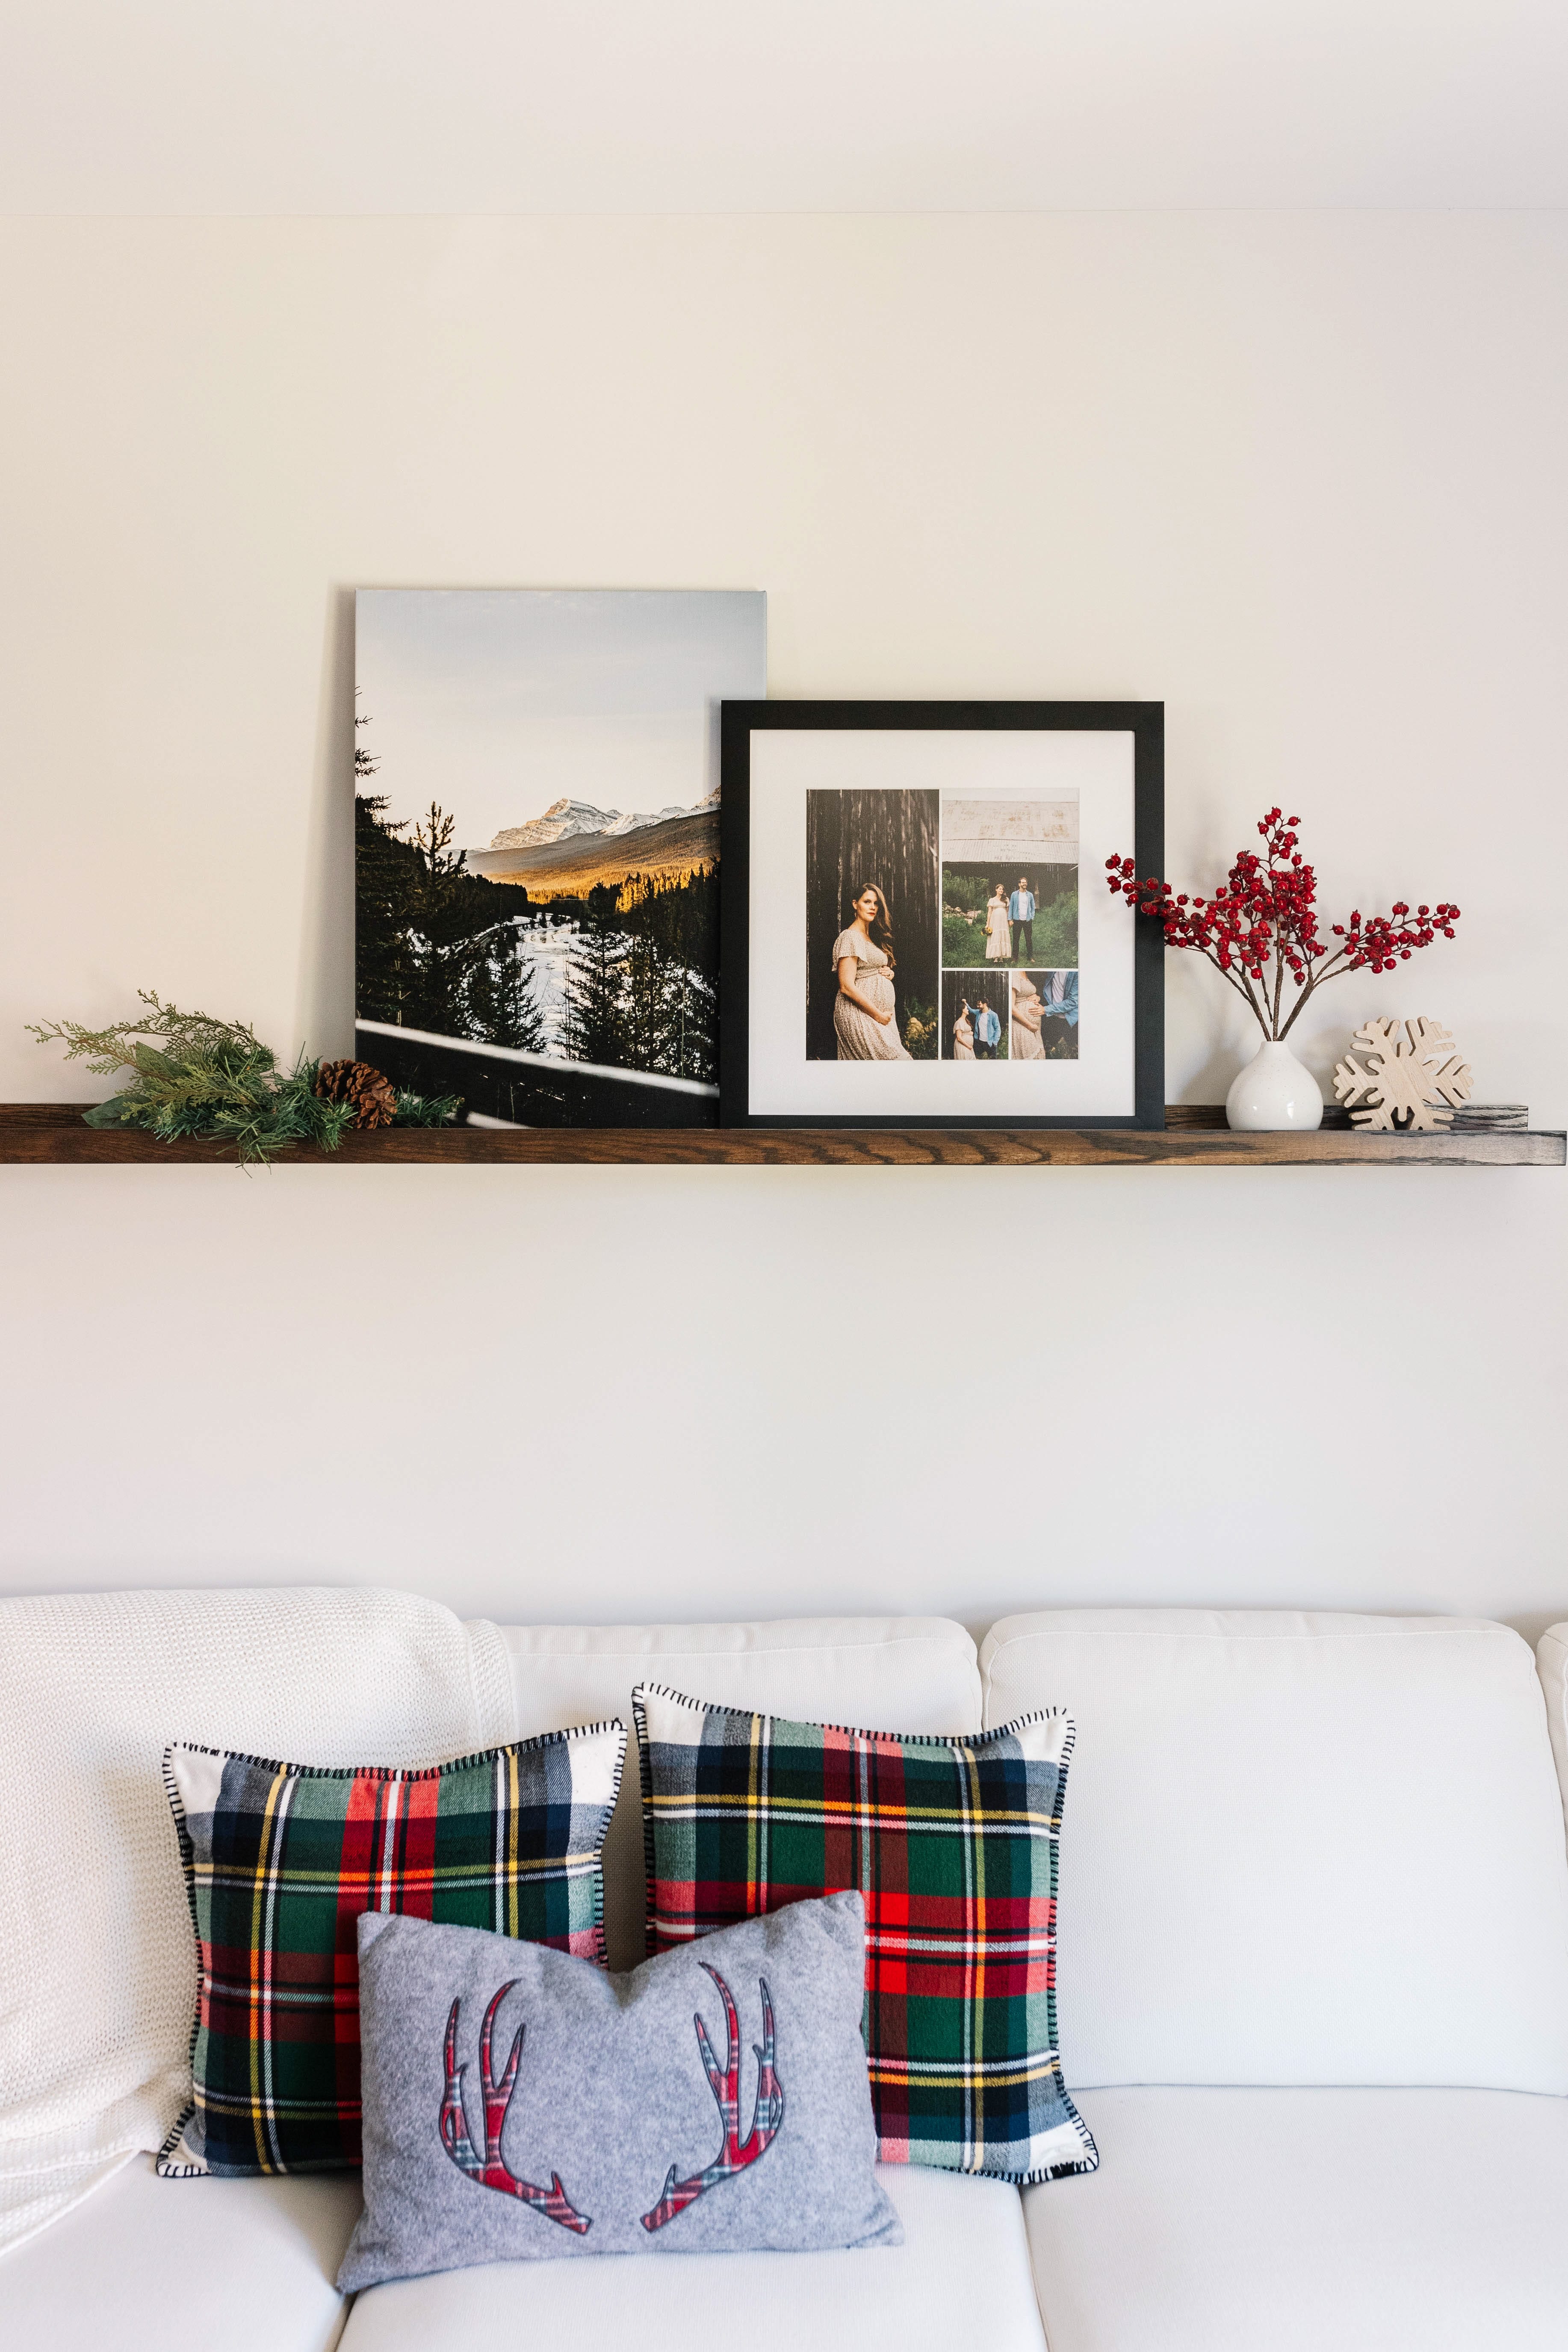 Canvas print of mountain and framed collage of family hung on a shelf